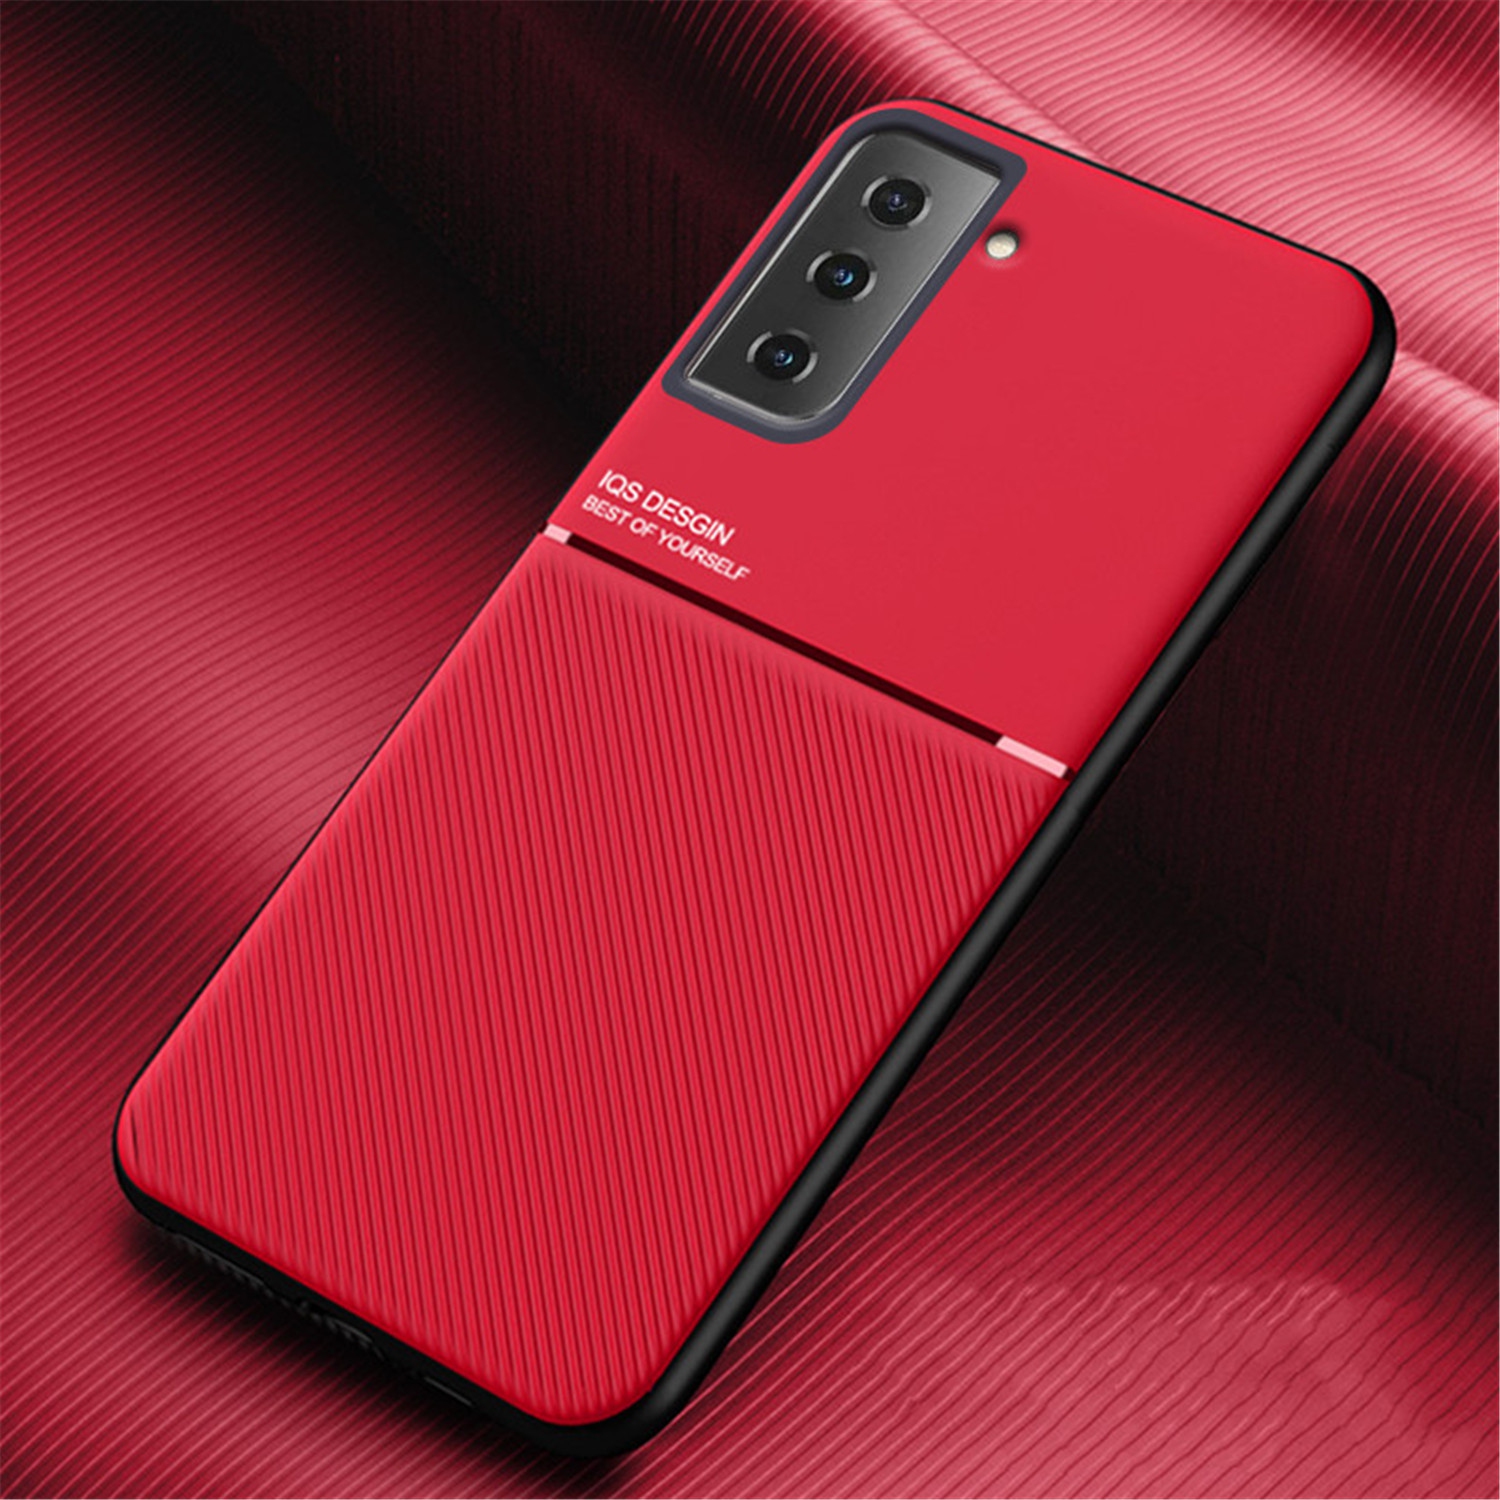 Kelvin Leather Magnetic Texture Slim Matte Back Phone Cove Anti Fall Frosted Stripe Cases For Samsunf Galaxy S21 FE -Red (FREE SHIPPING)